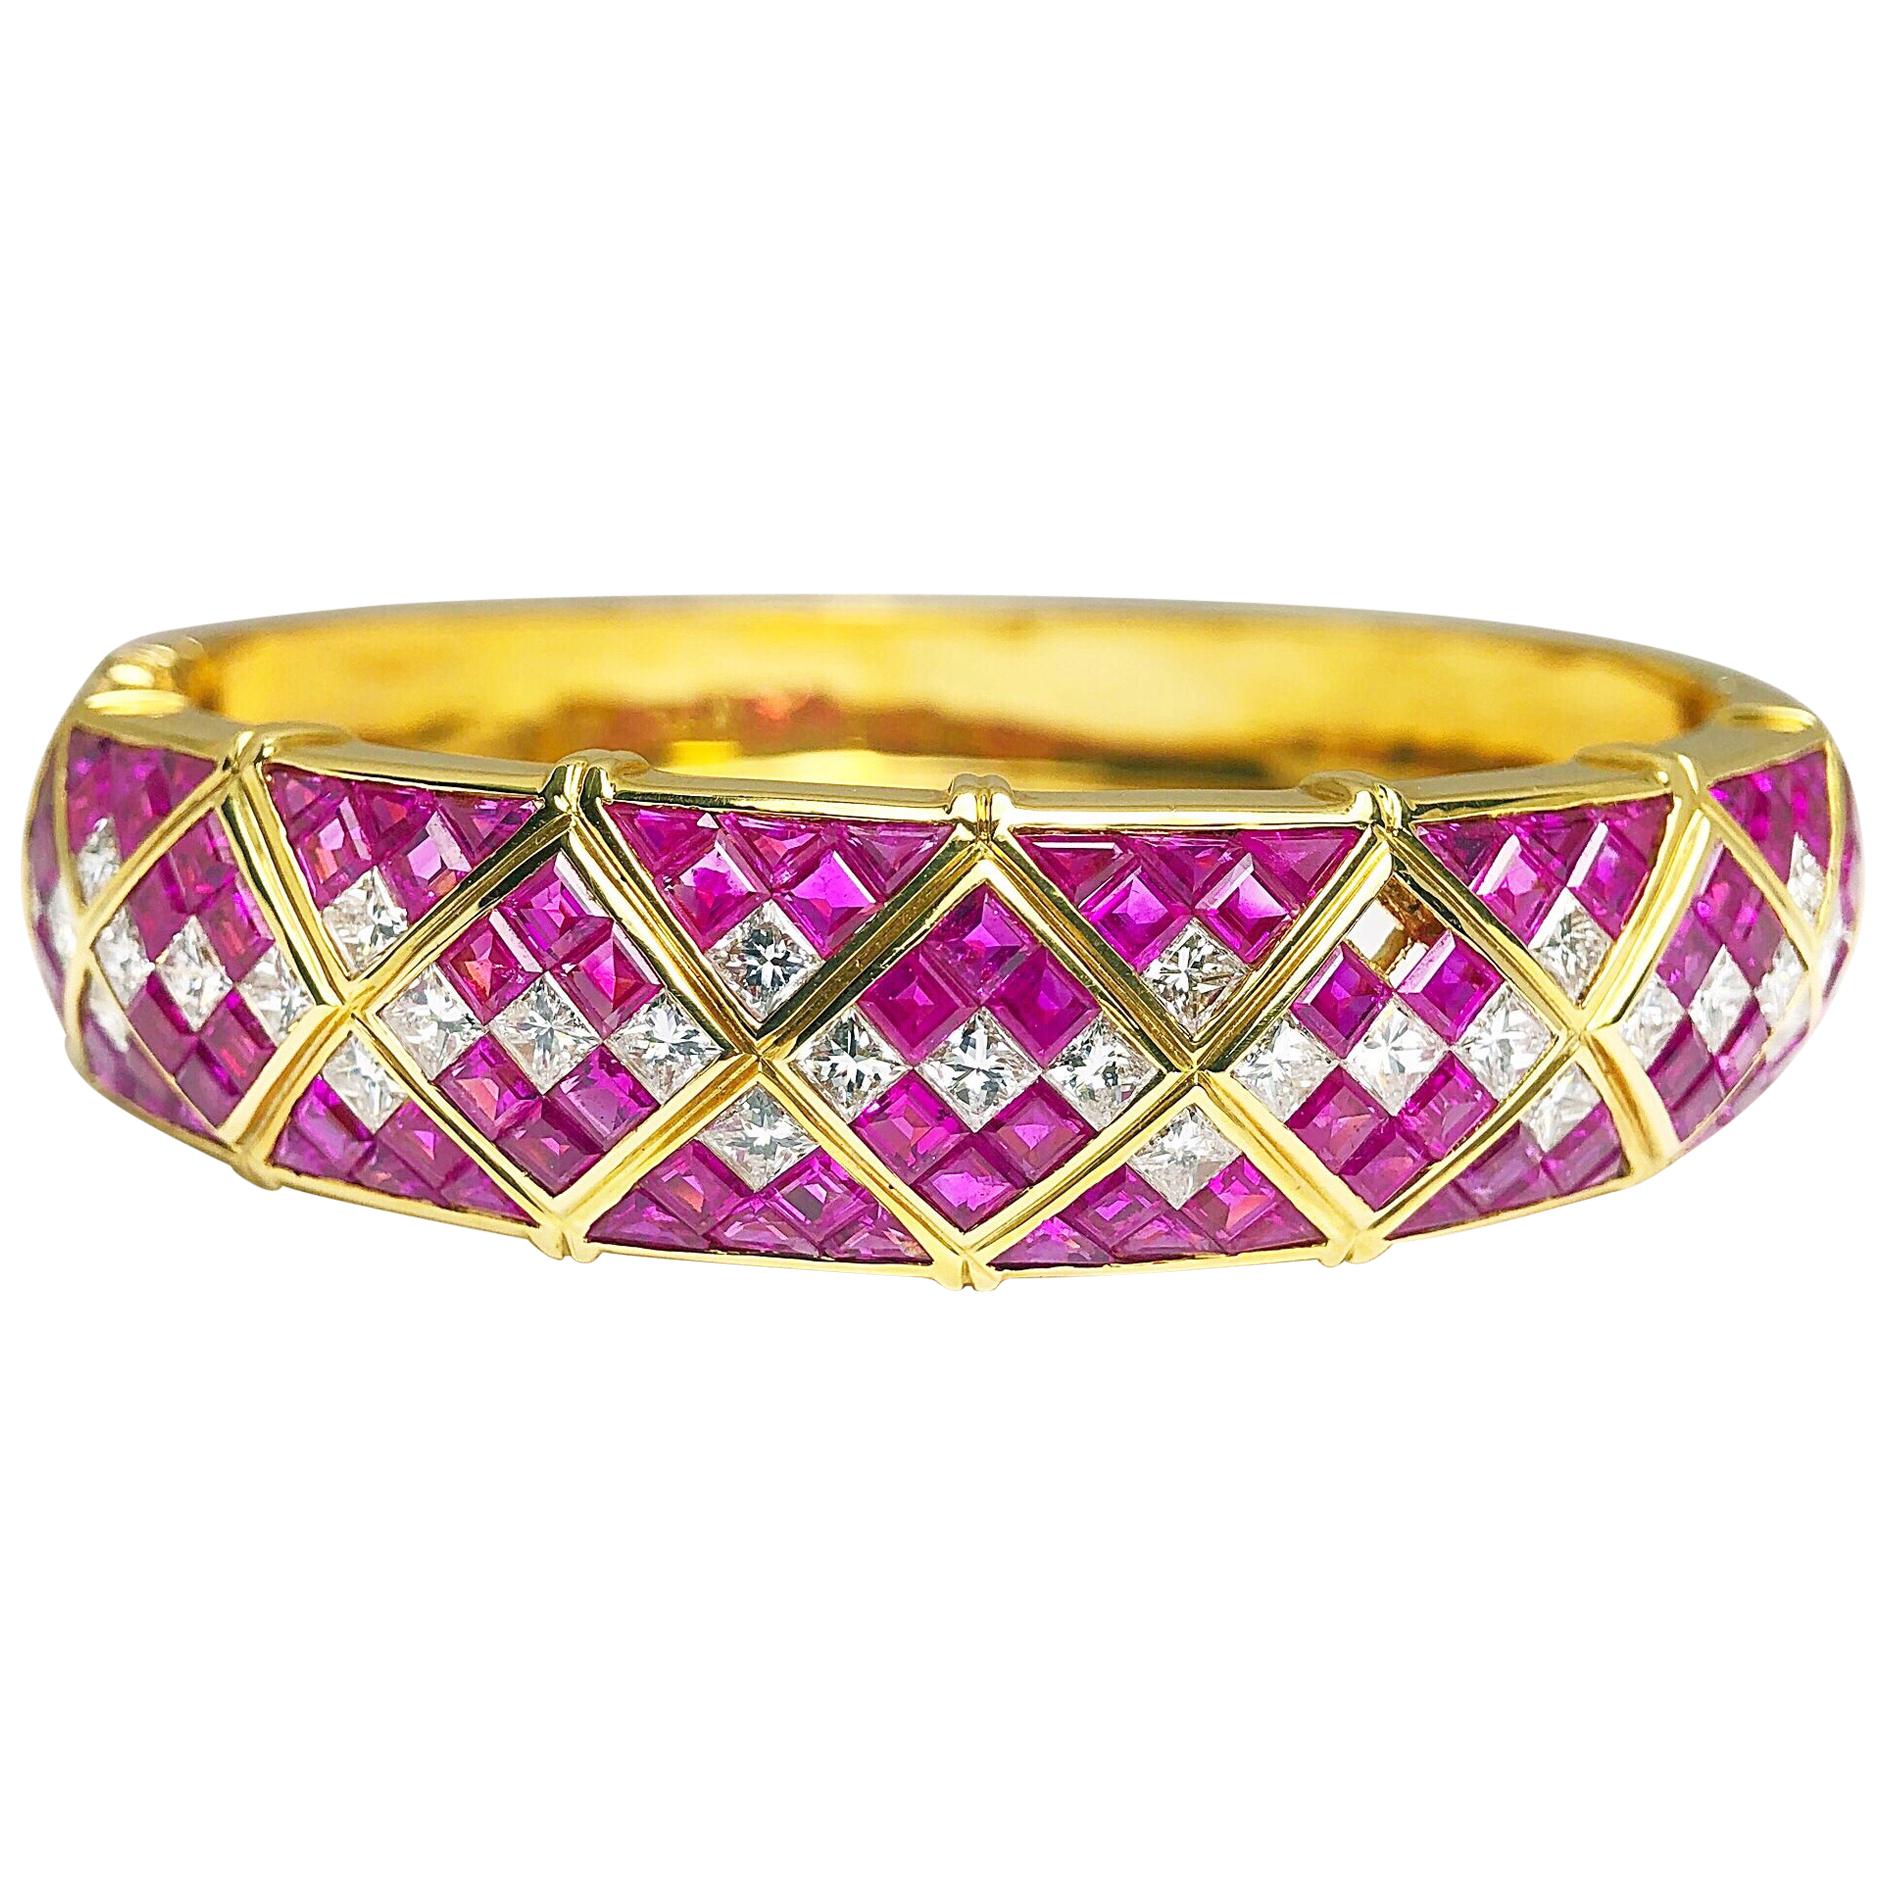 18Kt Gold, 10.35Ct Pink Sapphire and 3.91Ct Diamond Harlequin Pattern Bracelet For Sale